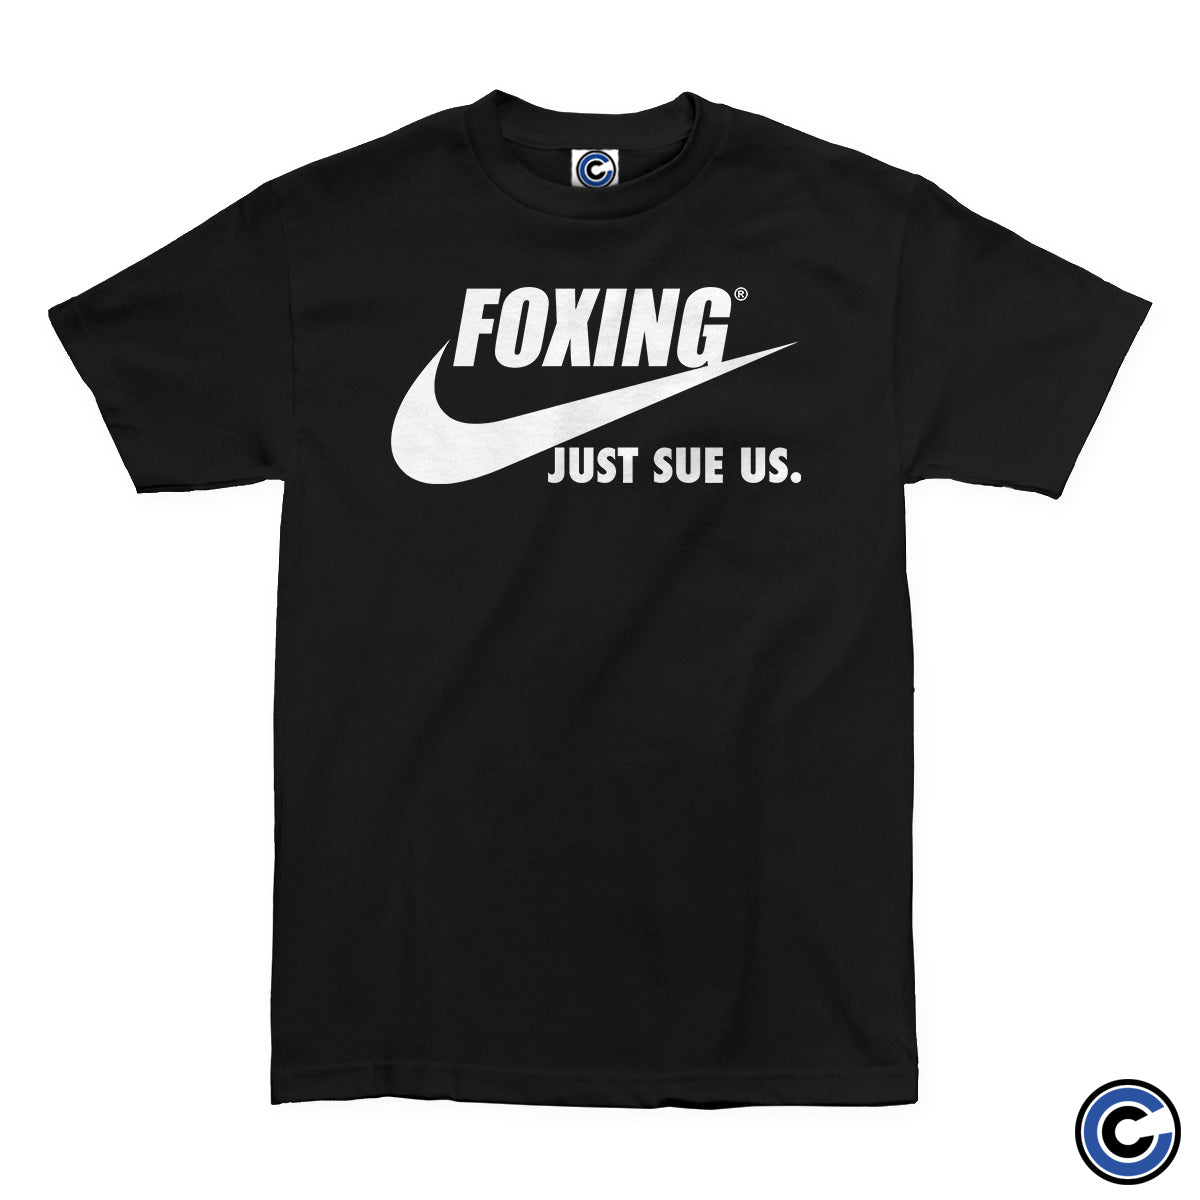 Foxing "Just Sue Us" Shirt